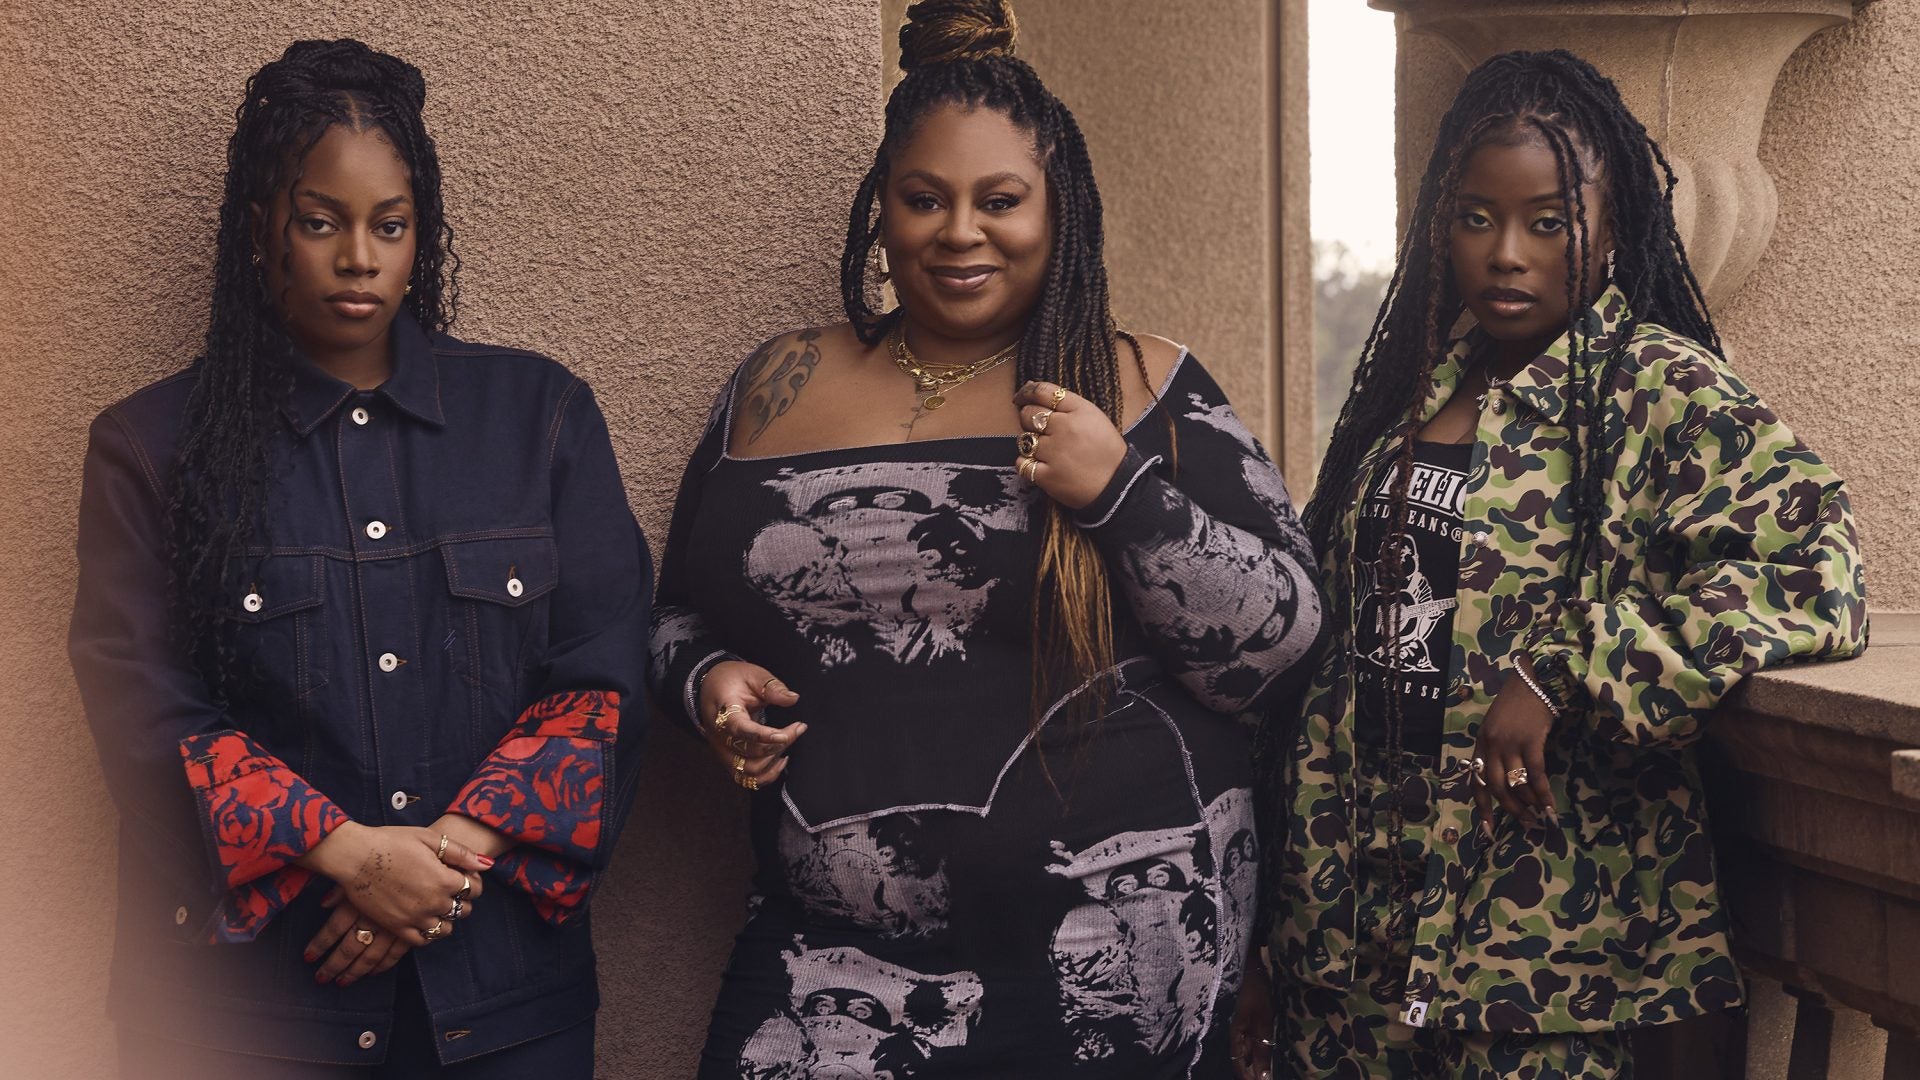 WATCH: Dionne Brown, Candice Carty-Williams, and Bellah Talk Bringing Imperfect Black Characters To The Screen With 'Queenie'